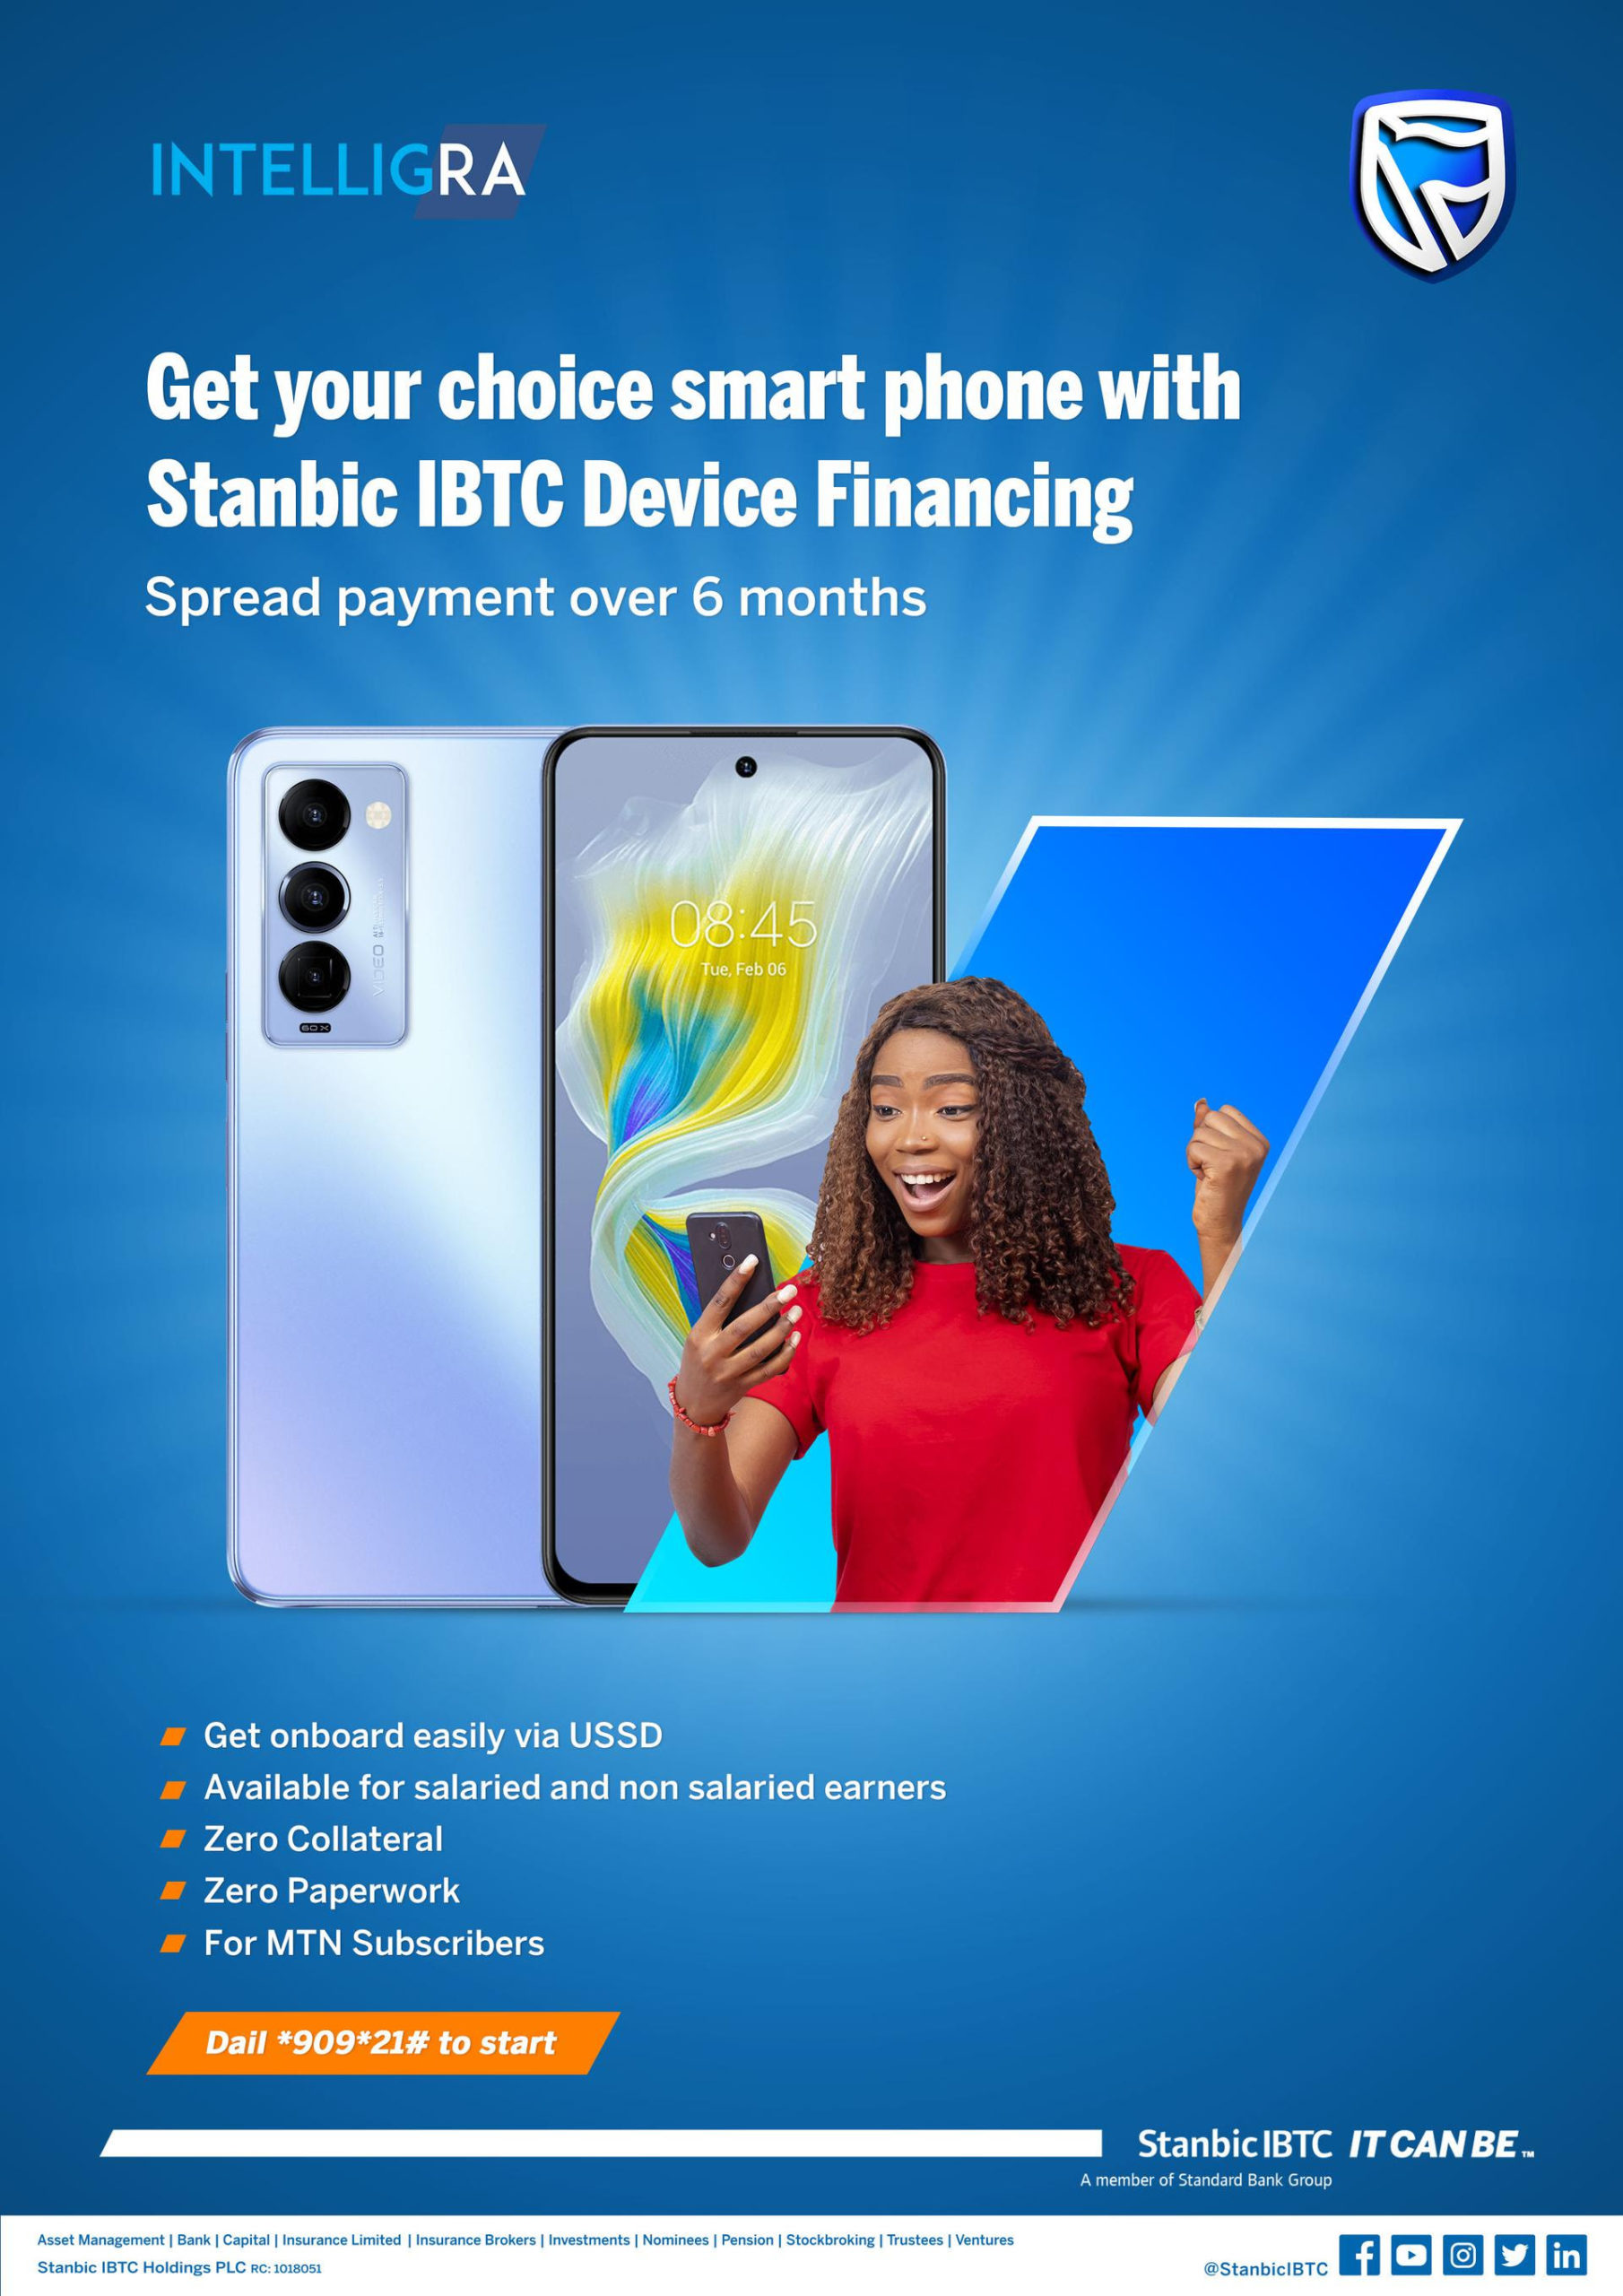 Get a new phone for the new year with Stanbic IBTC Device Financing